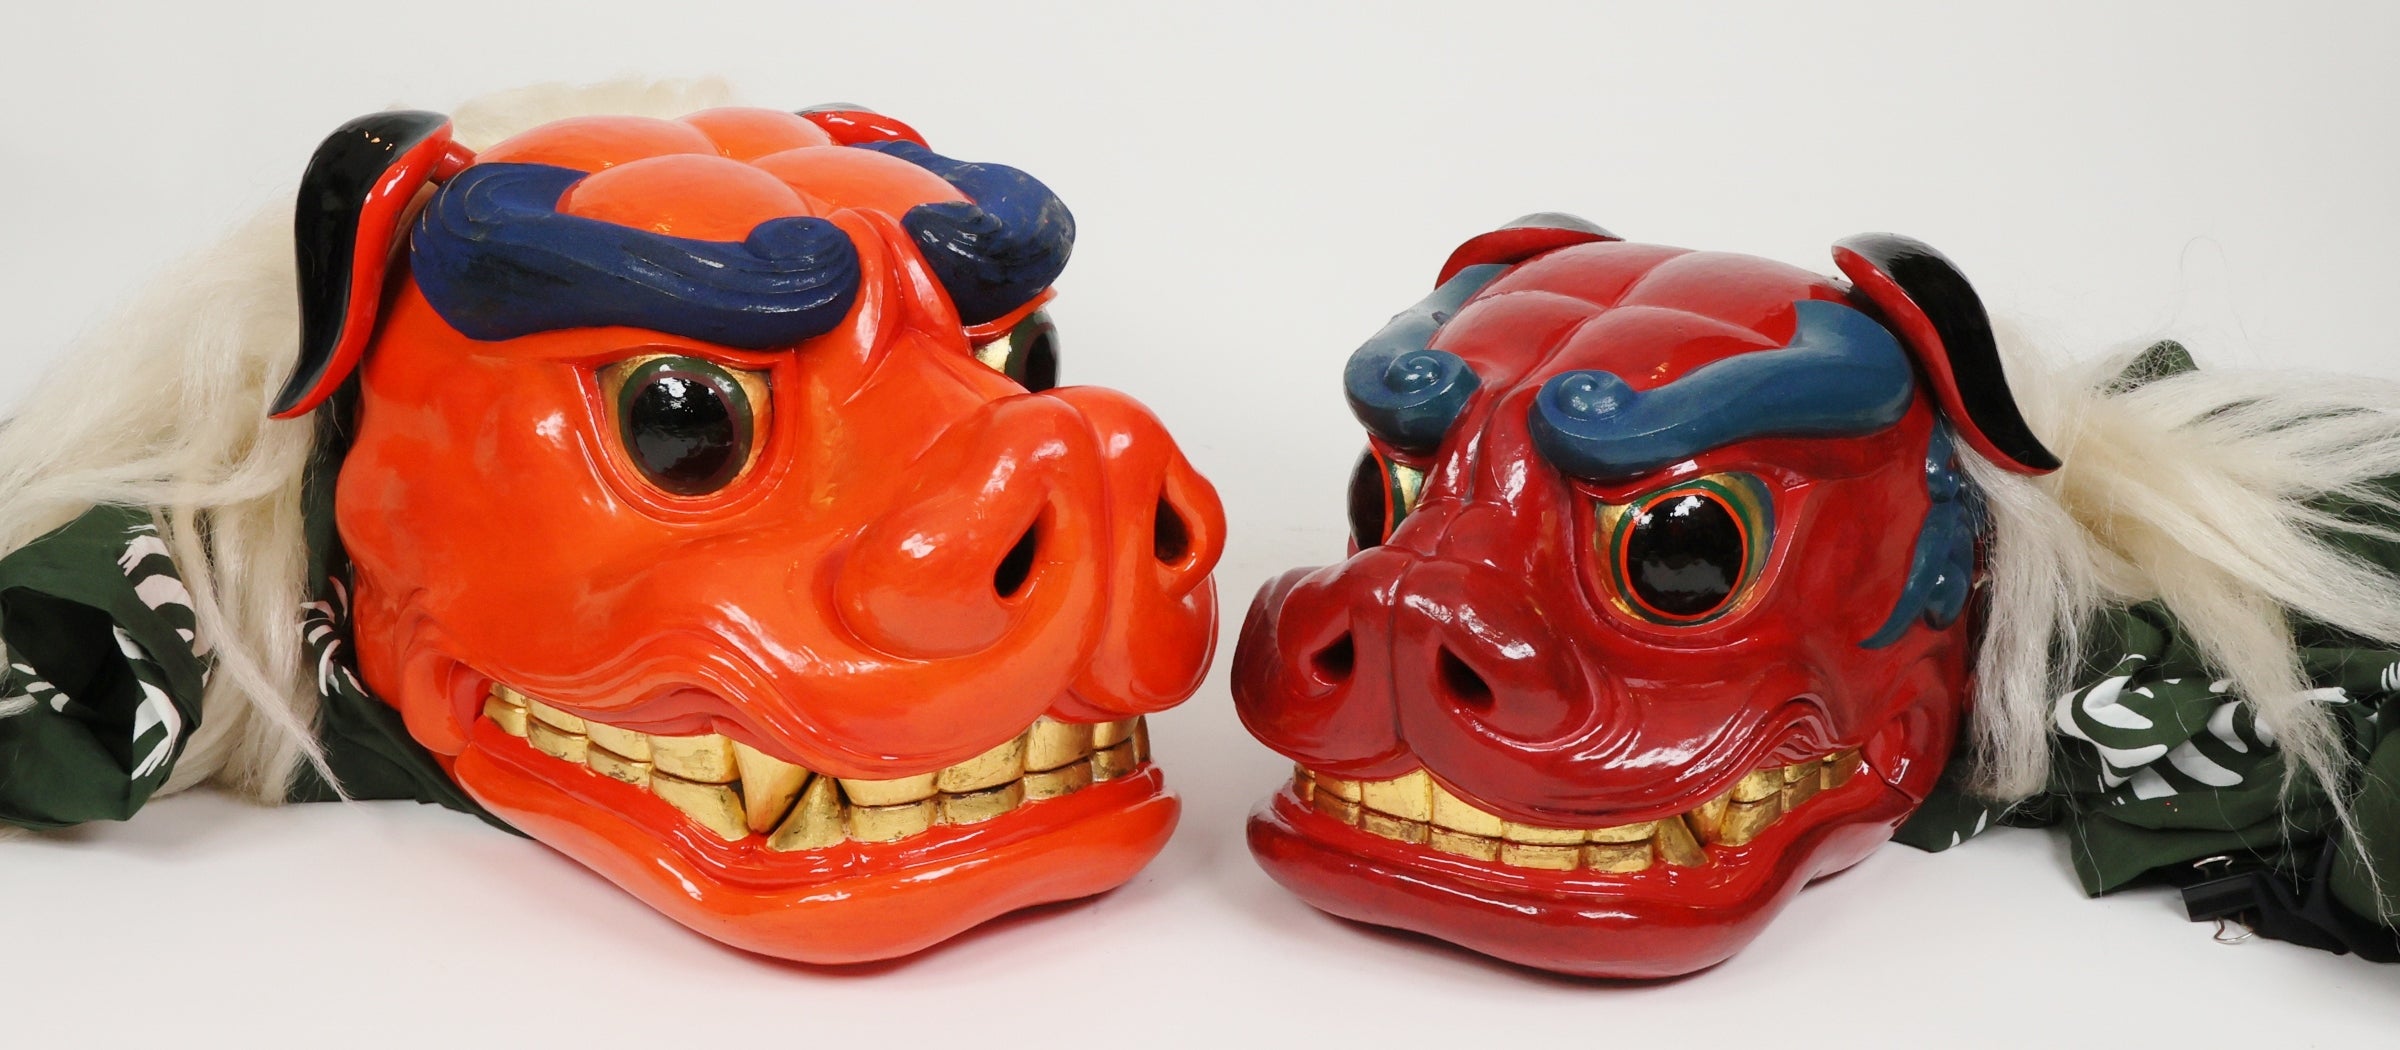 This lion dance head is completely handmade by a skilled woodworker, carved from real wood and colored with special paint.